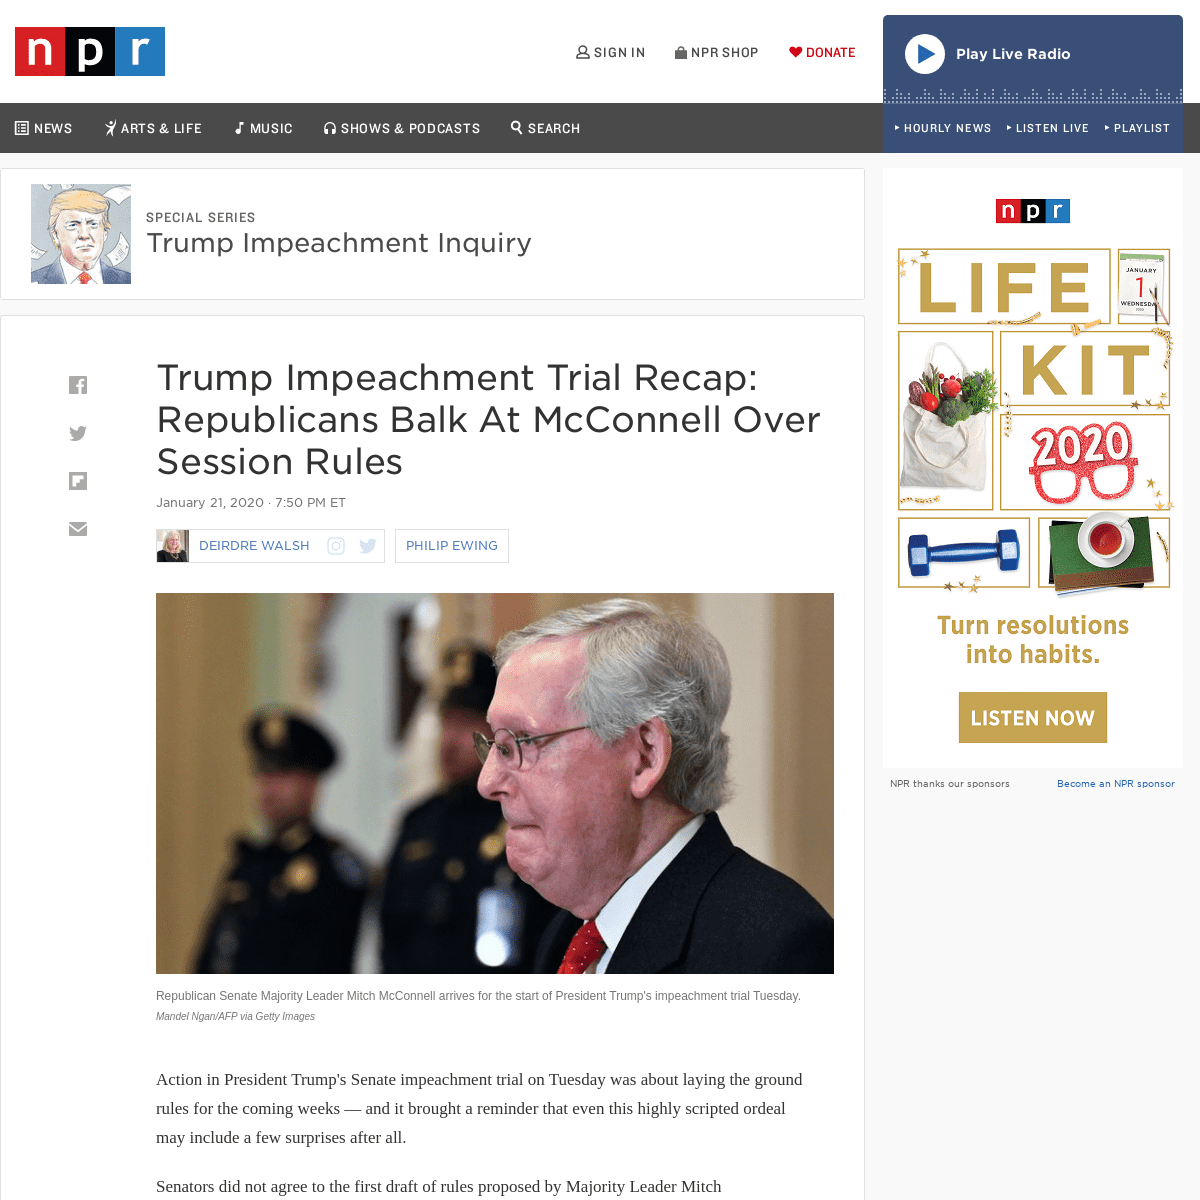 A complete backup of www.npr.org/2020/01/21/798317525/trump-impeachment-trial-recap-republicans-balk-at-mcconnell-over-session-r